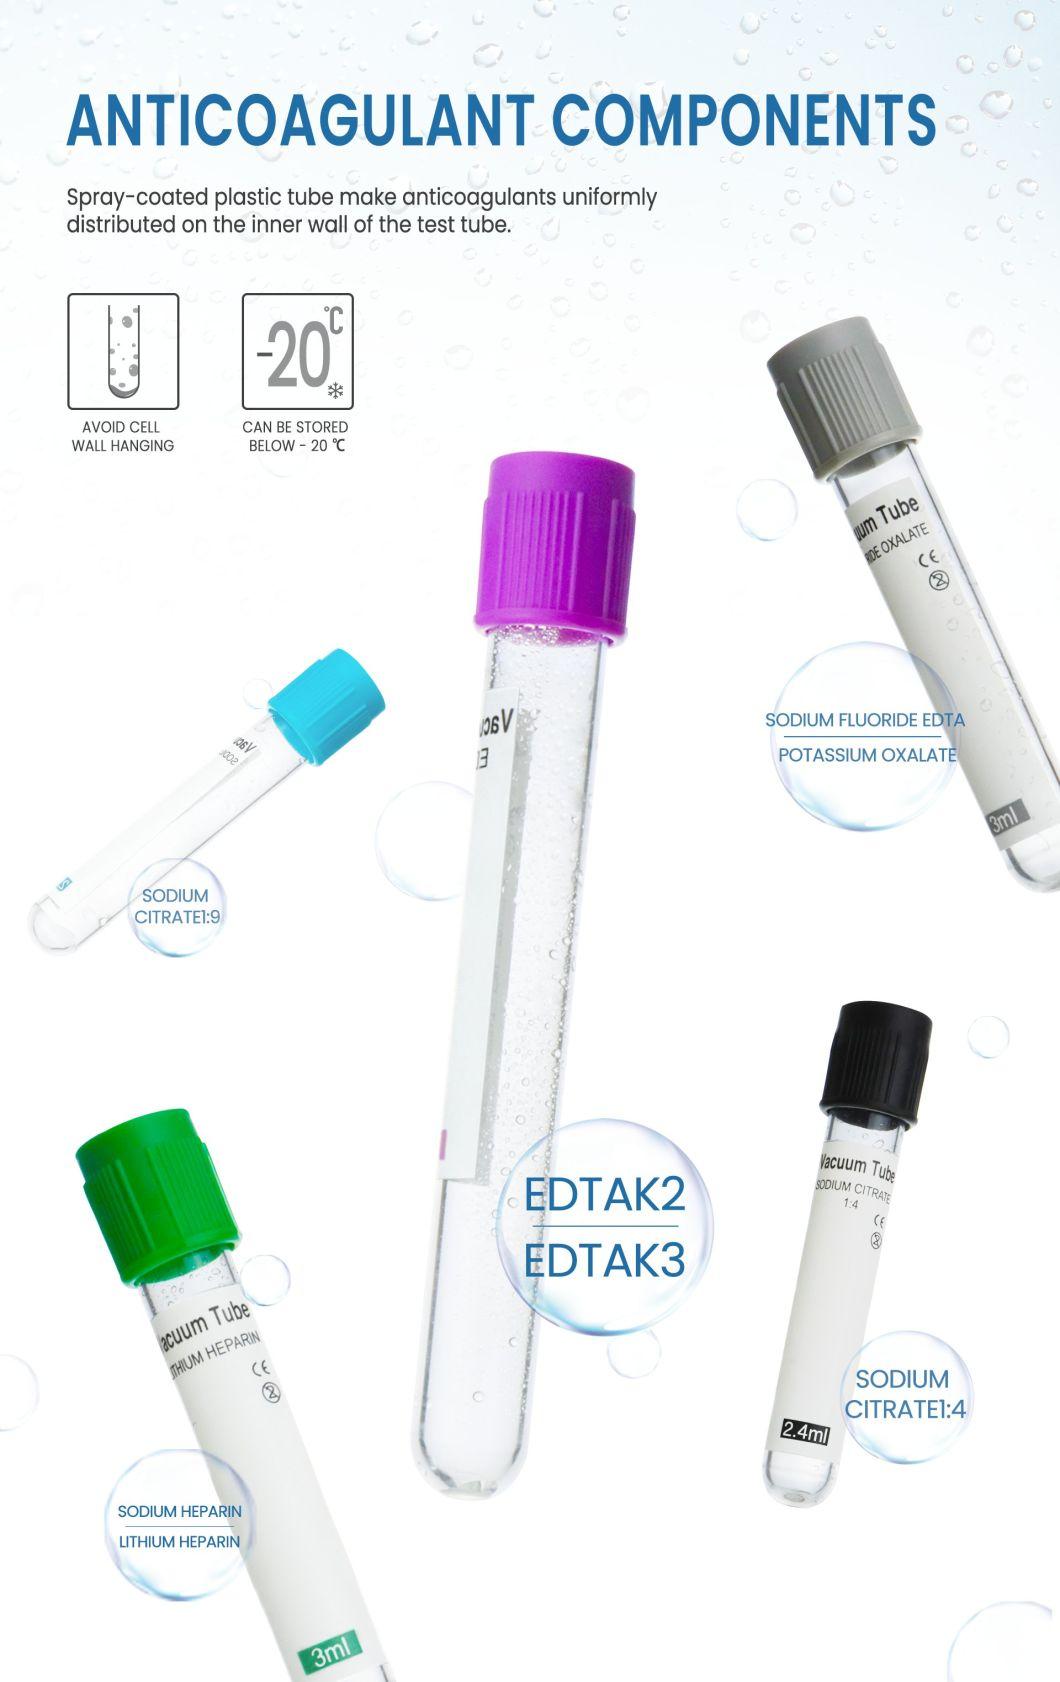 Hospital Medical Vacuum Blood Collection Test Tube CE Approved for Single Use